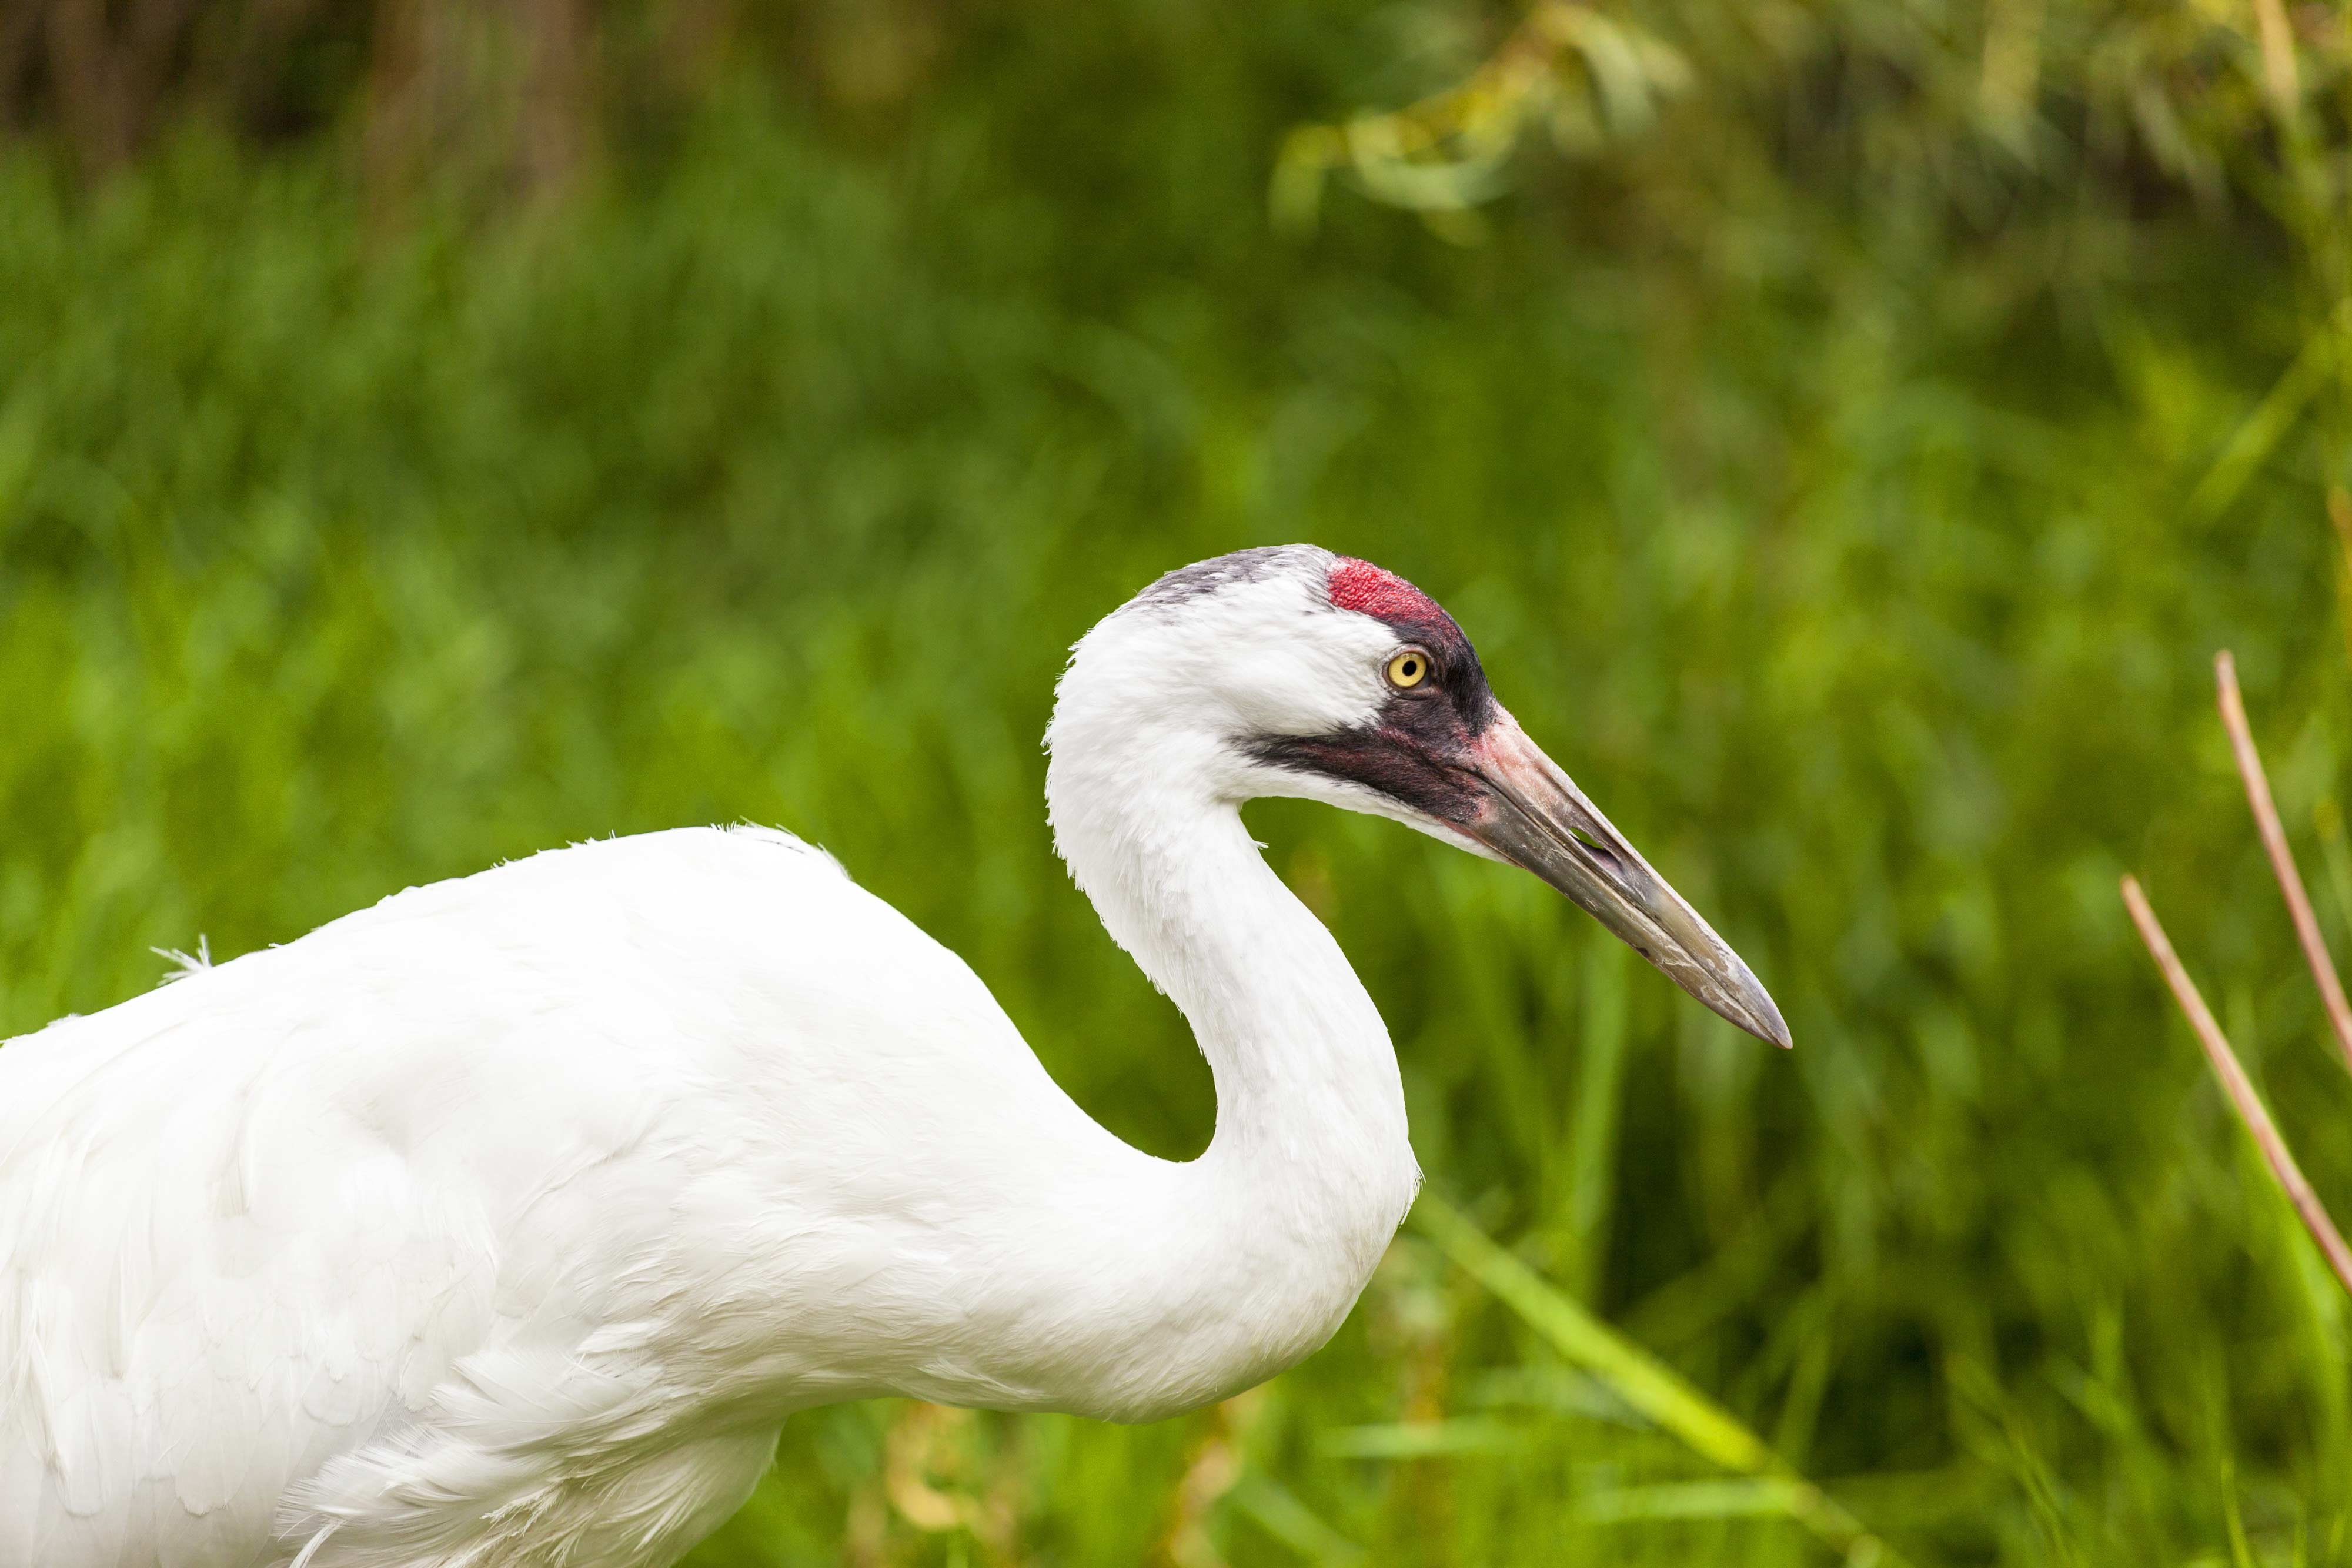 A whooping crane in a field.